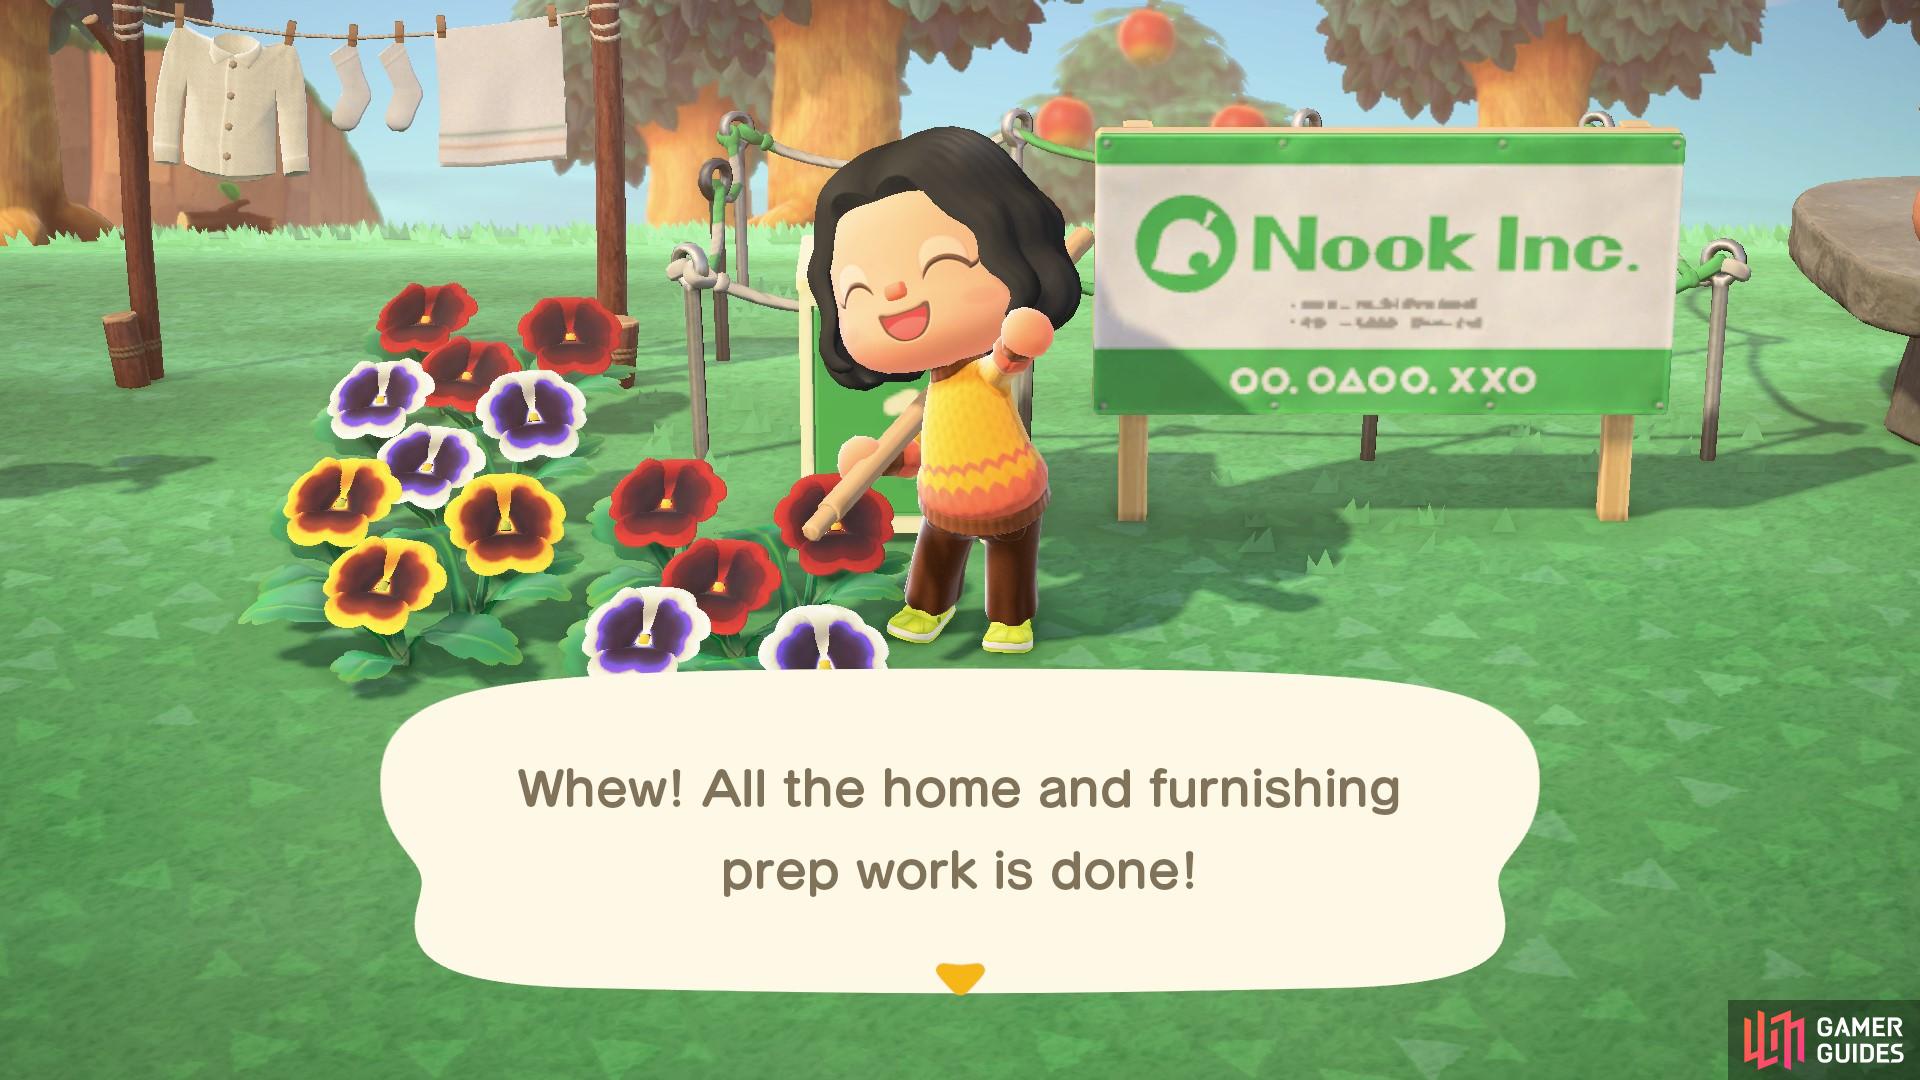 That took a lot of resources! But you're finally done and ready to meet new villagers.